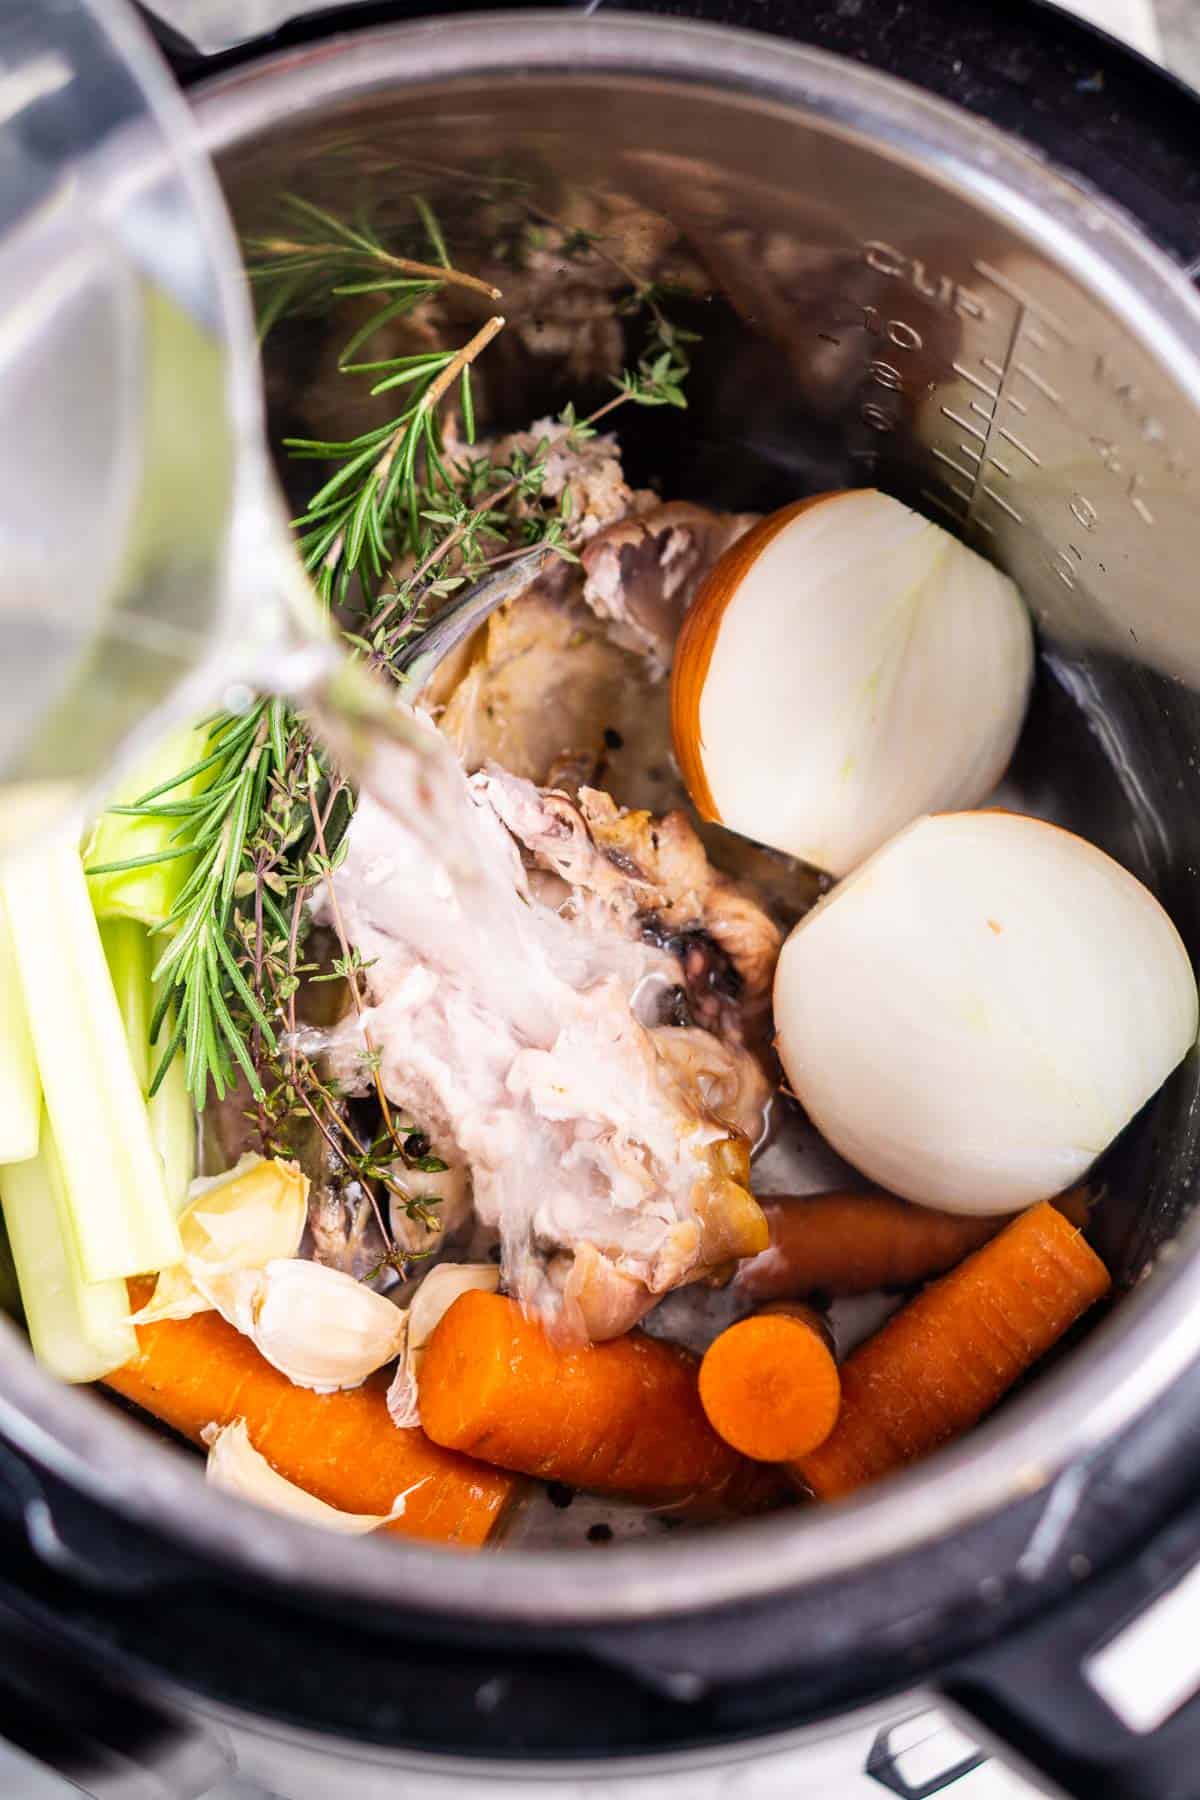 water is added to a pot with turkey carcass, onions, carrots, and fresh herbs